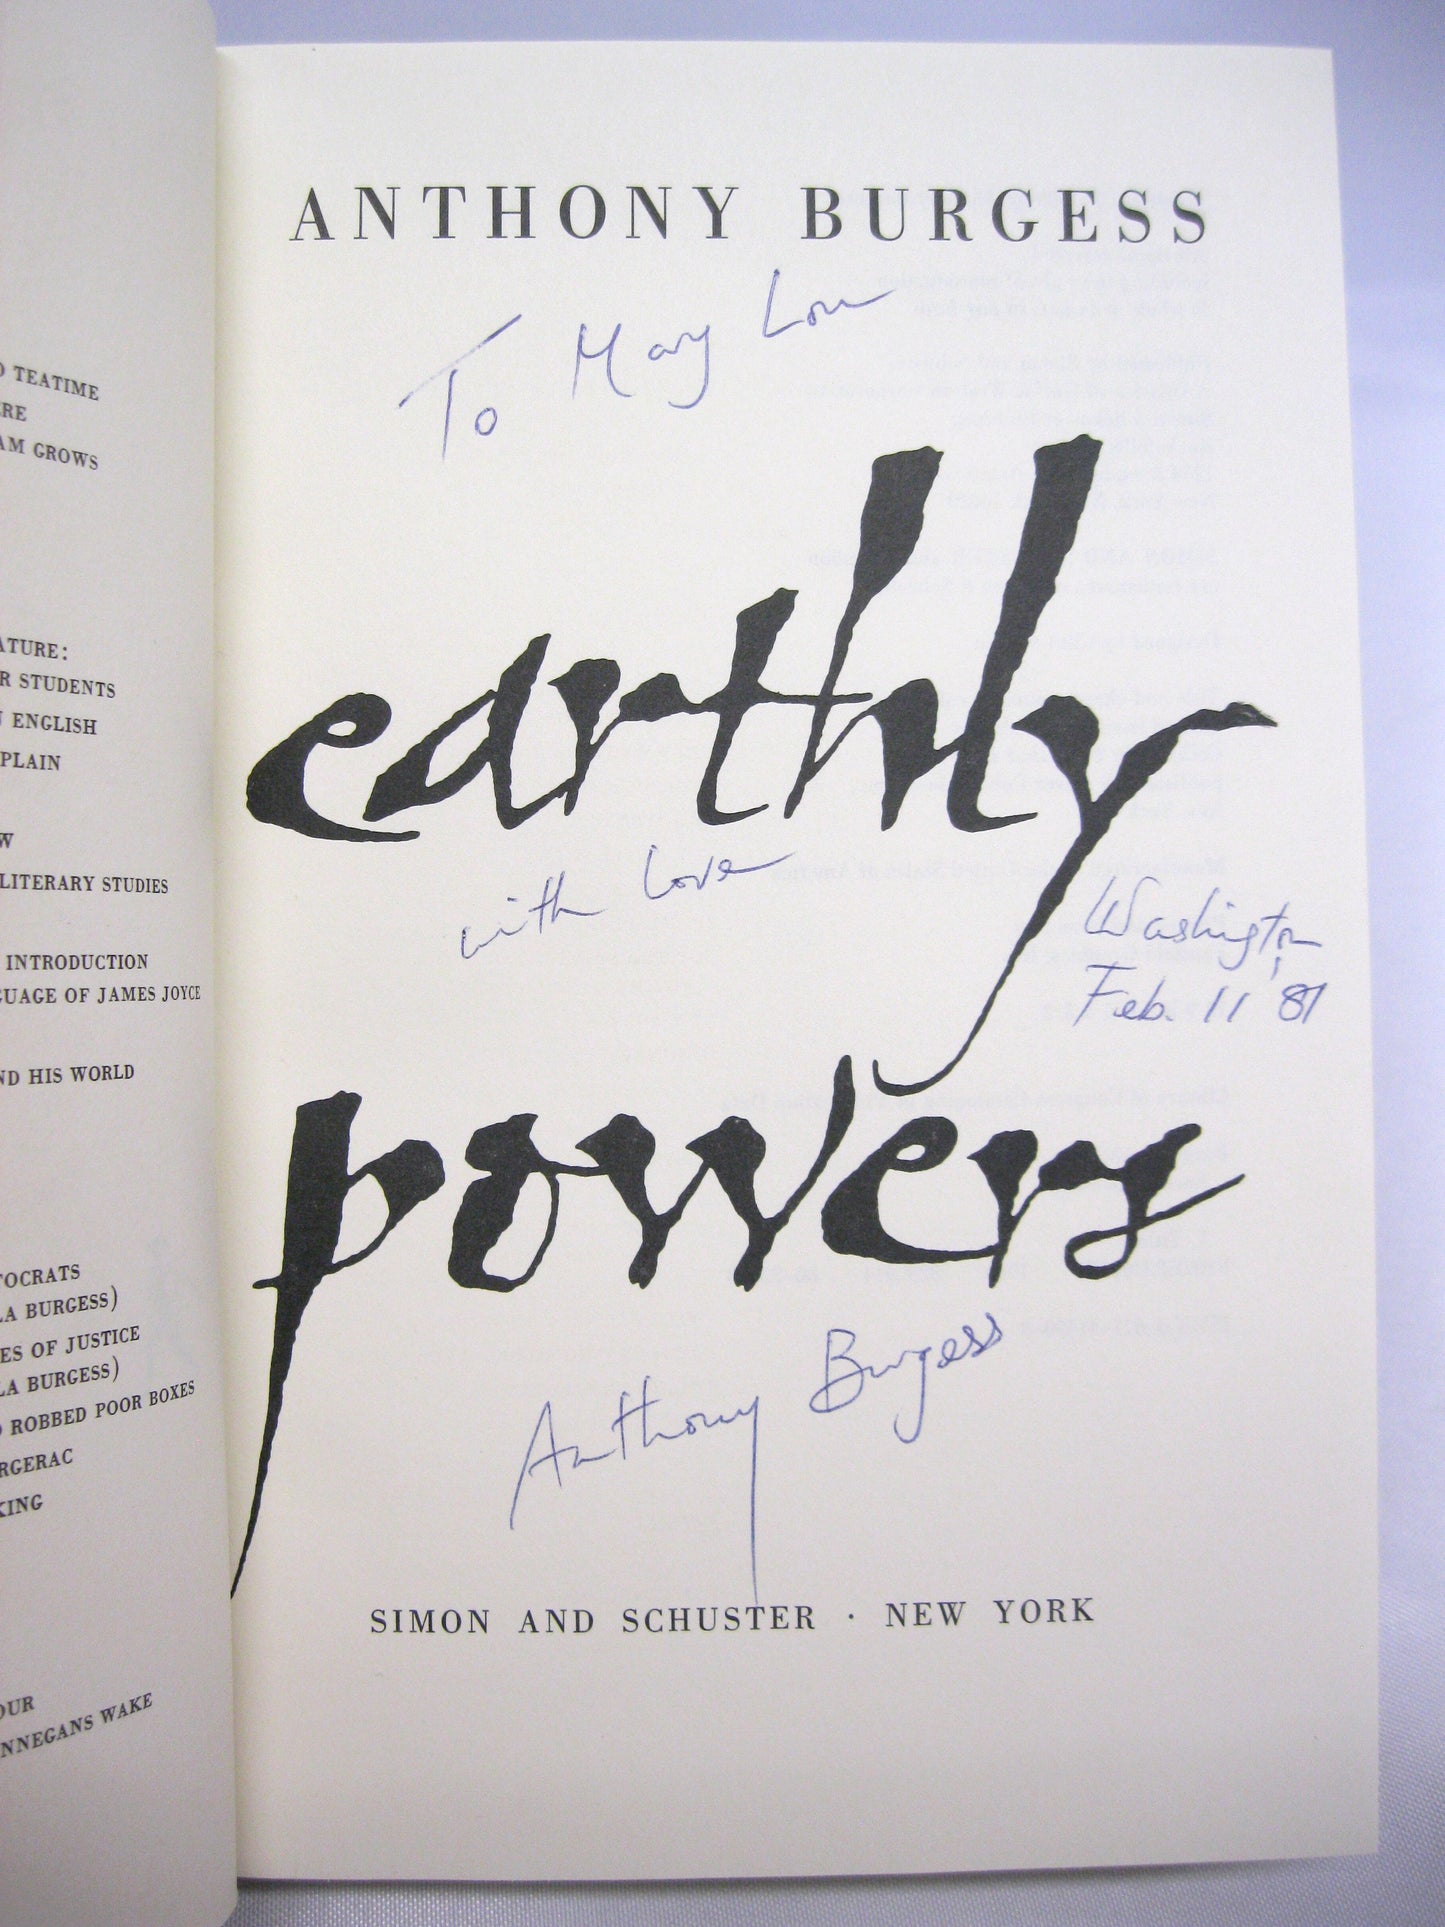 Earthly Powers by Anthony Burgess